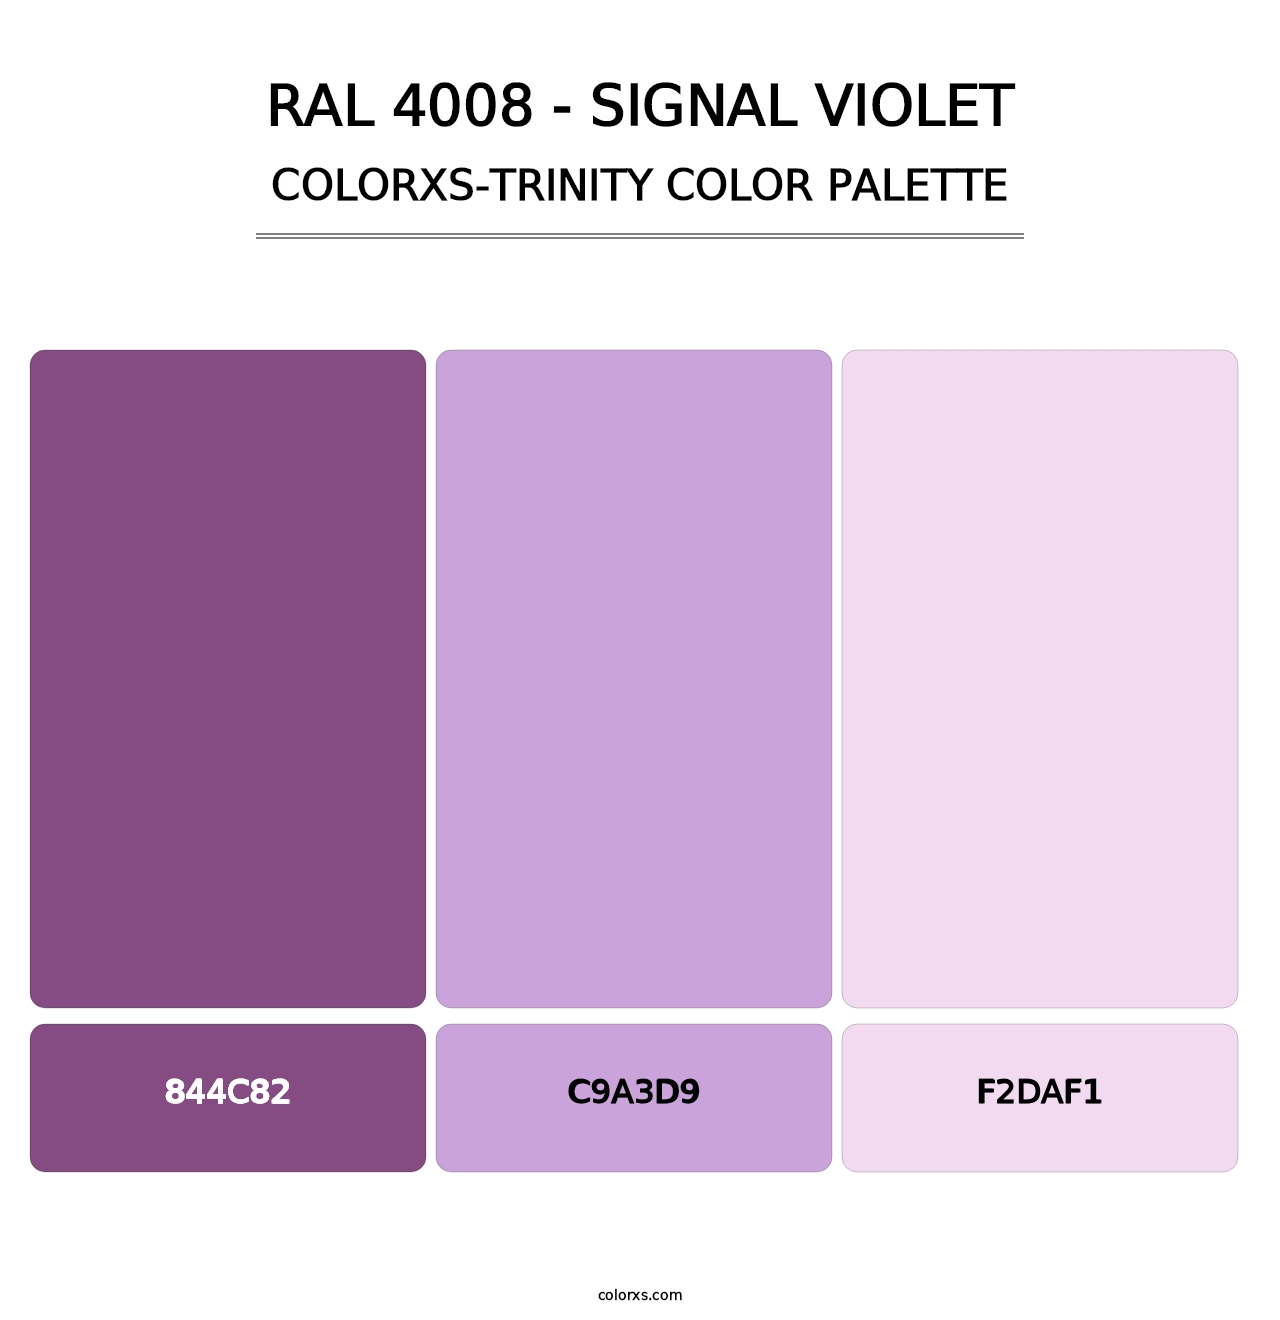 RAL 4008 - Signal Violet - Colorxs Trinity Palette